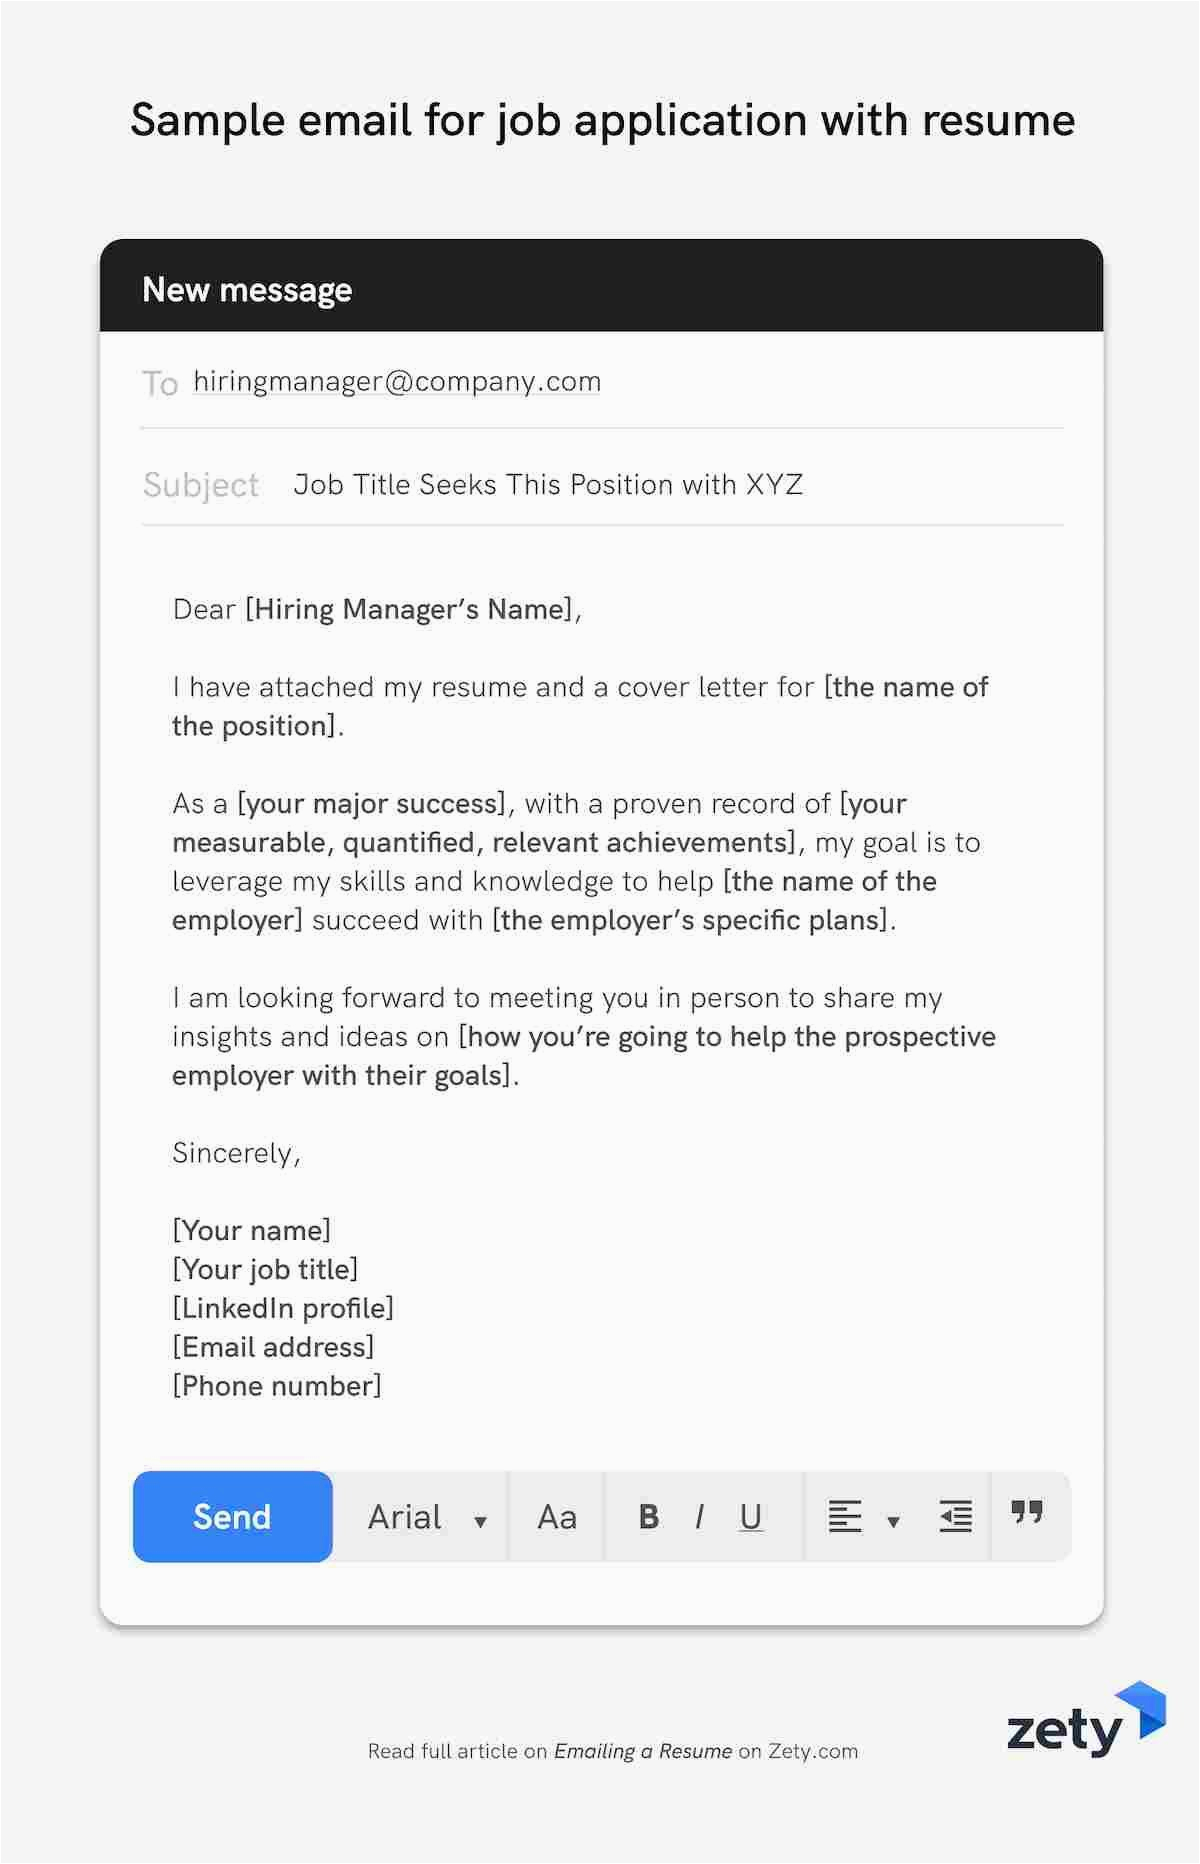 Sample Email to Send Resume to Company How to Email A Resume and Cover Letter to An Employer